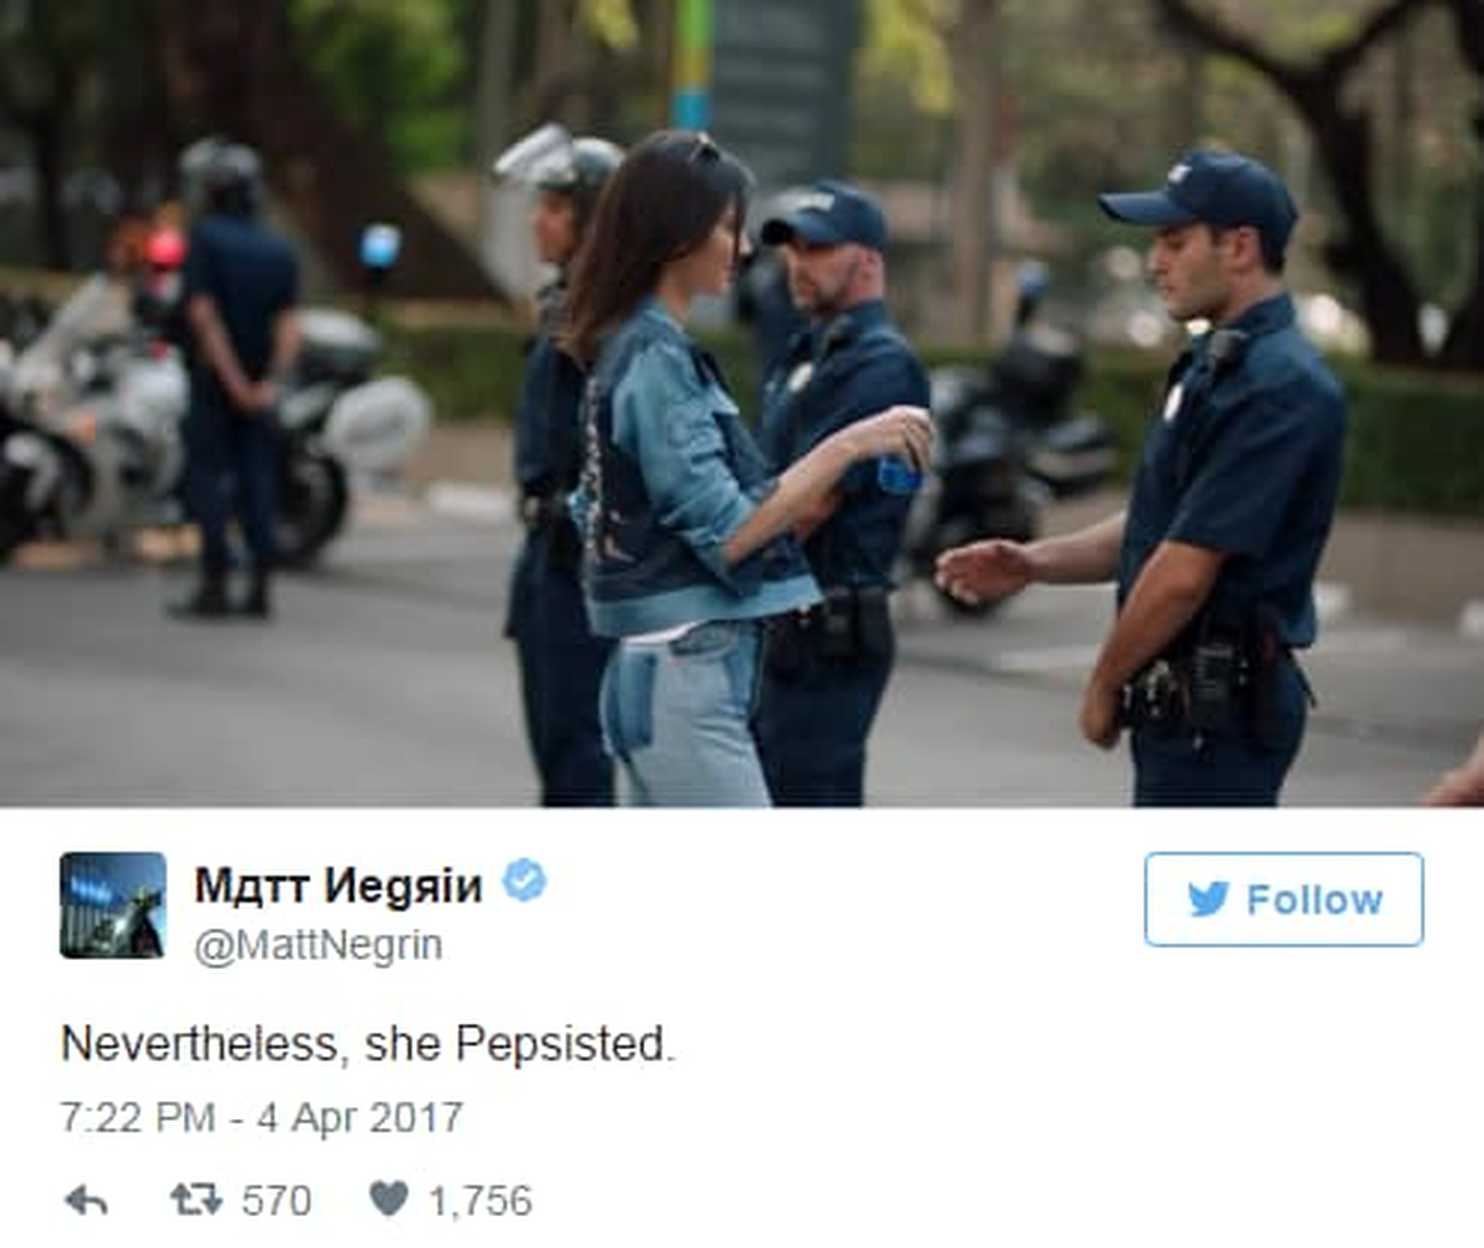 ‘Nevertheless, she Pepsisted’: Kendall Jenner made a Pepsi ad. The Internet made glorious memes.